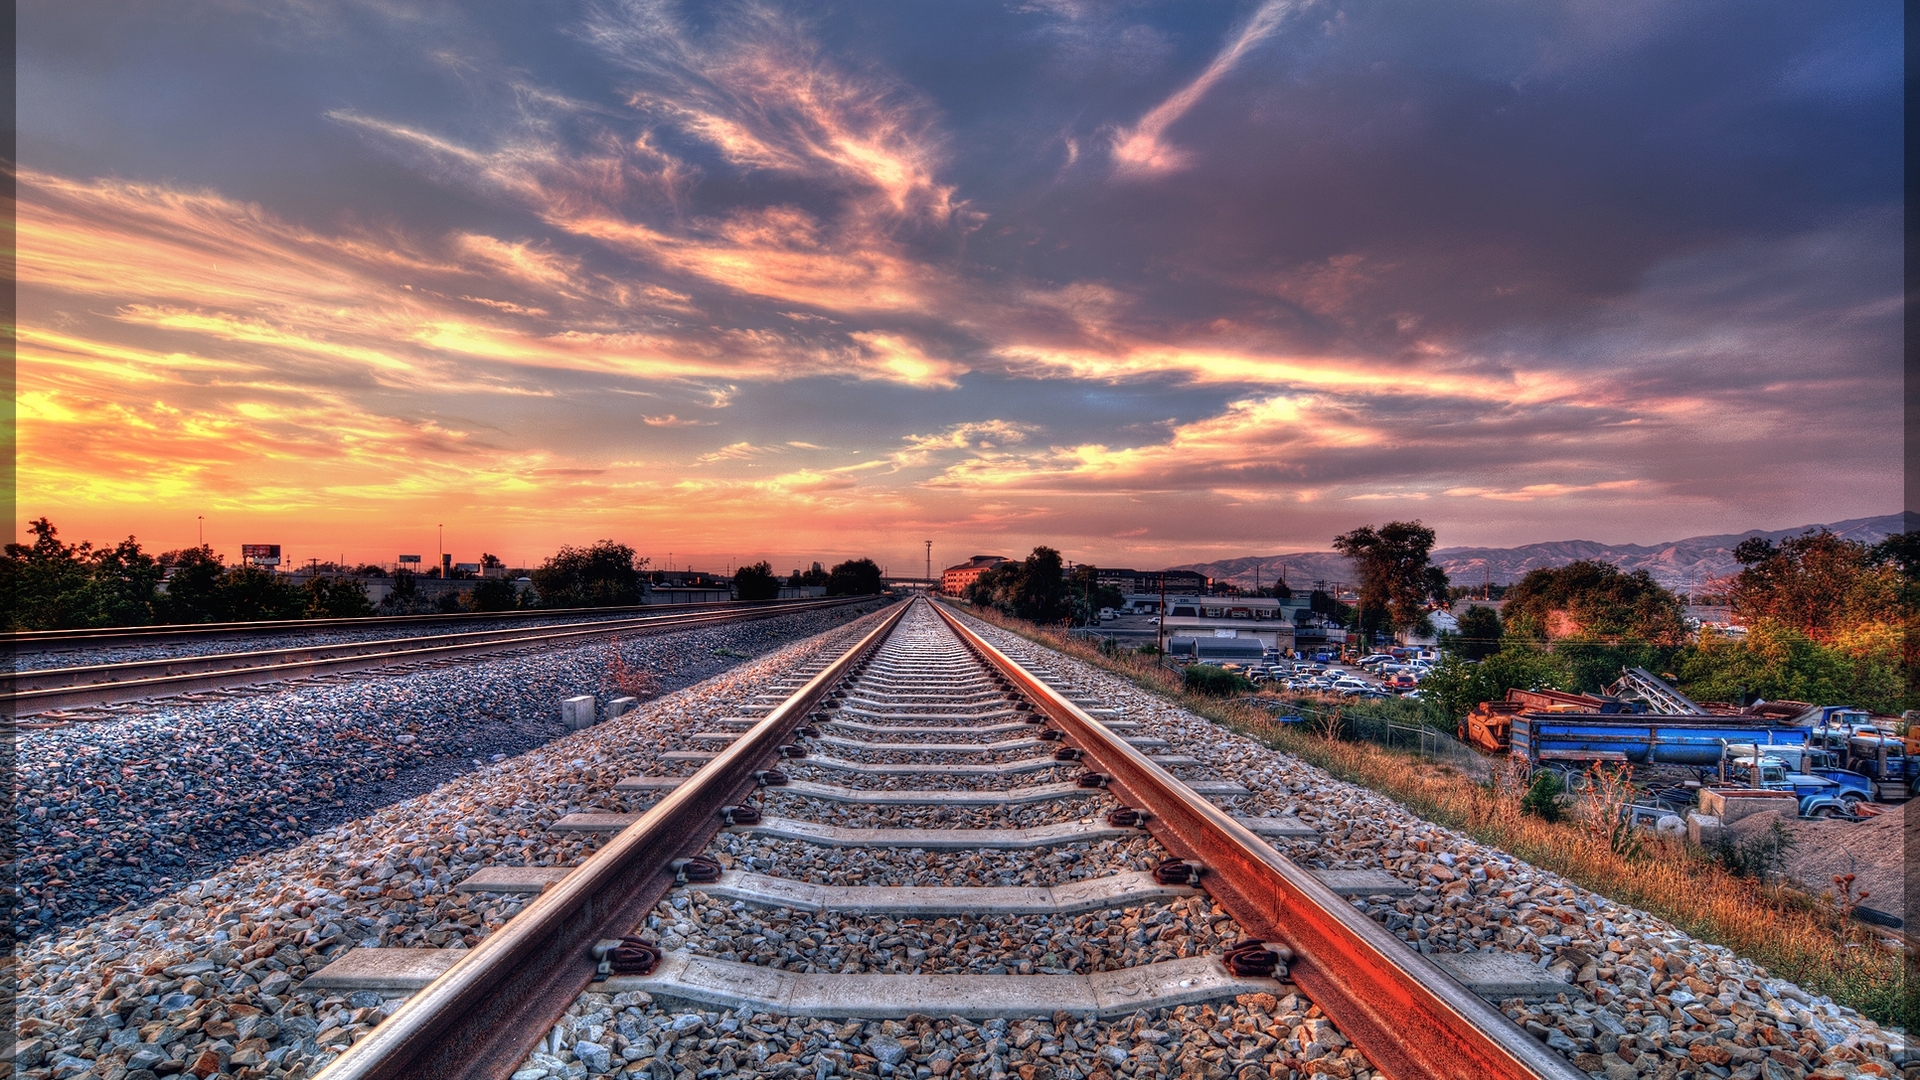 40 Relaxing Railroad Track Wallpapers